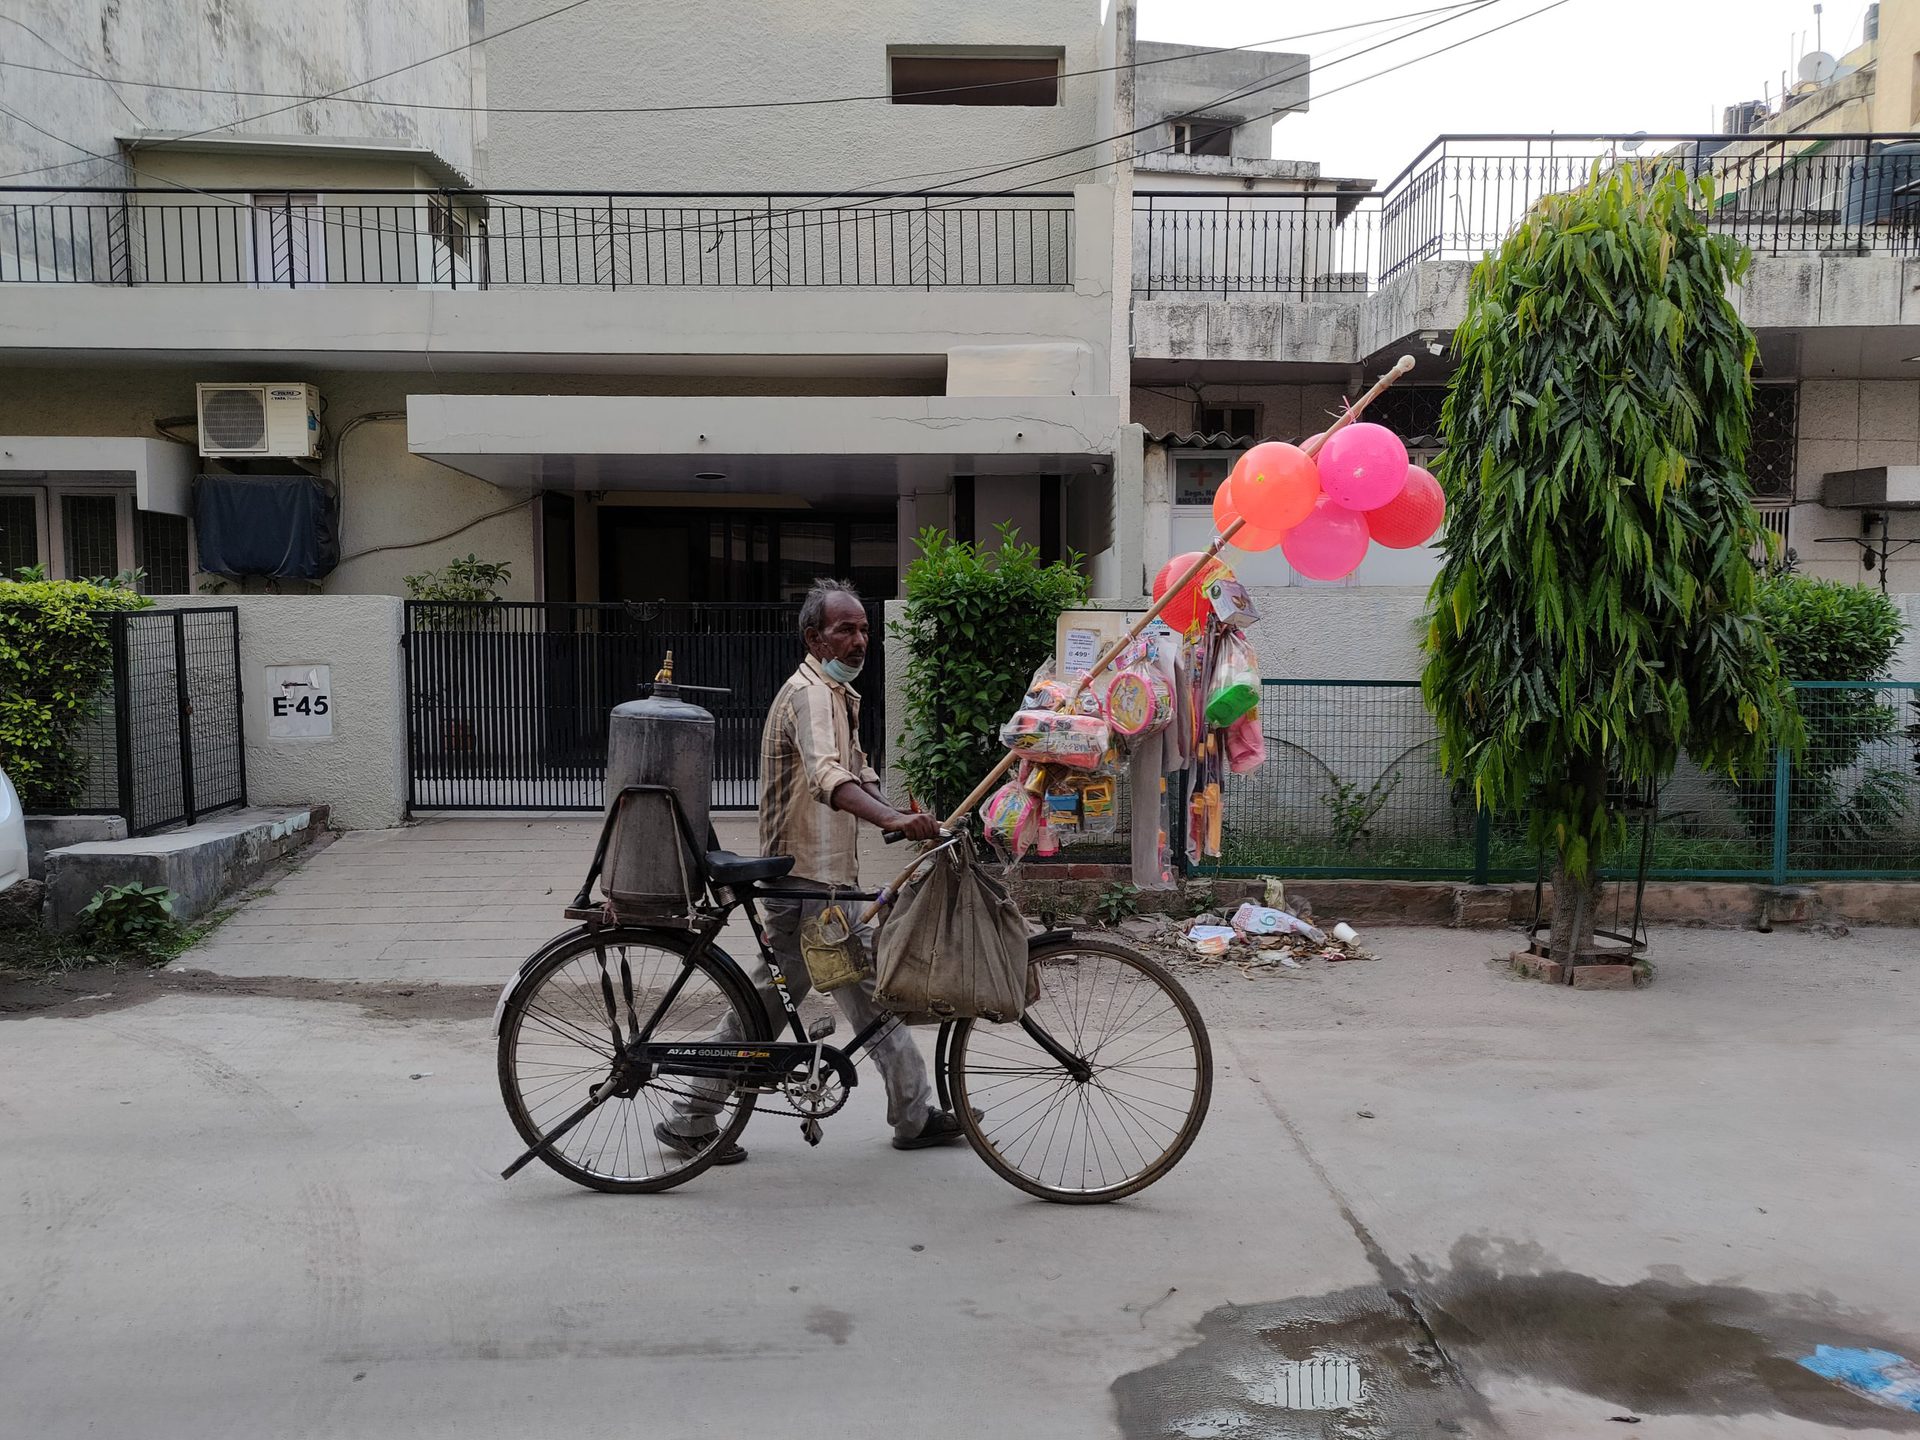 Realme GT standard camera normal light shot of a man on a bicycle with balloons.